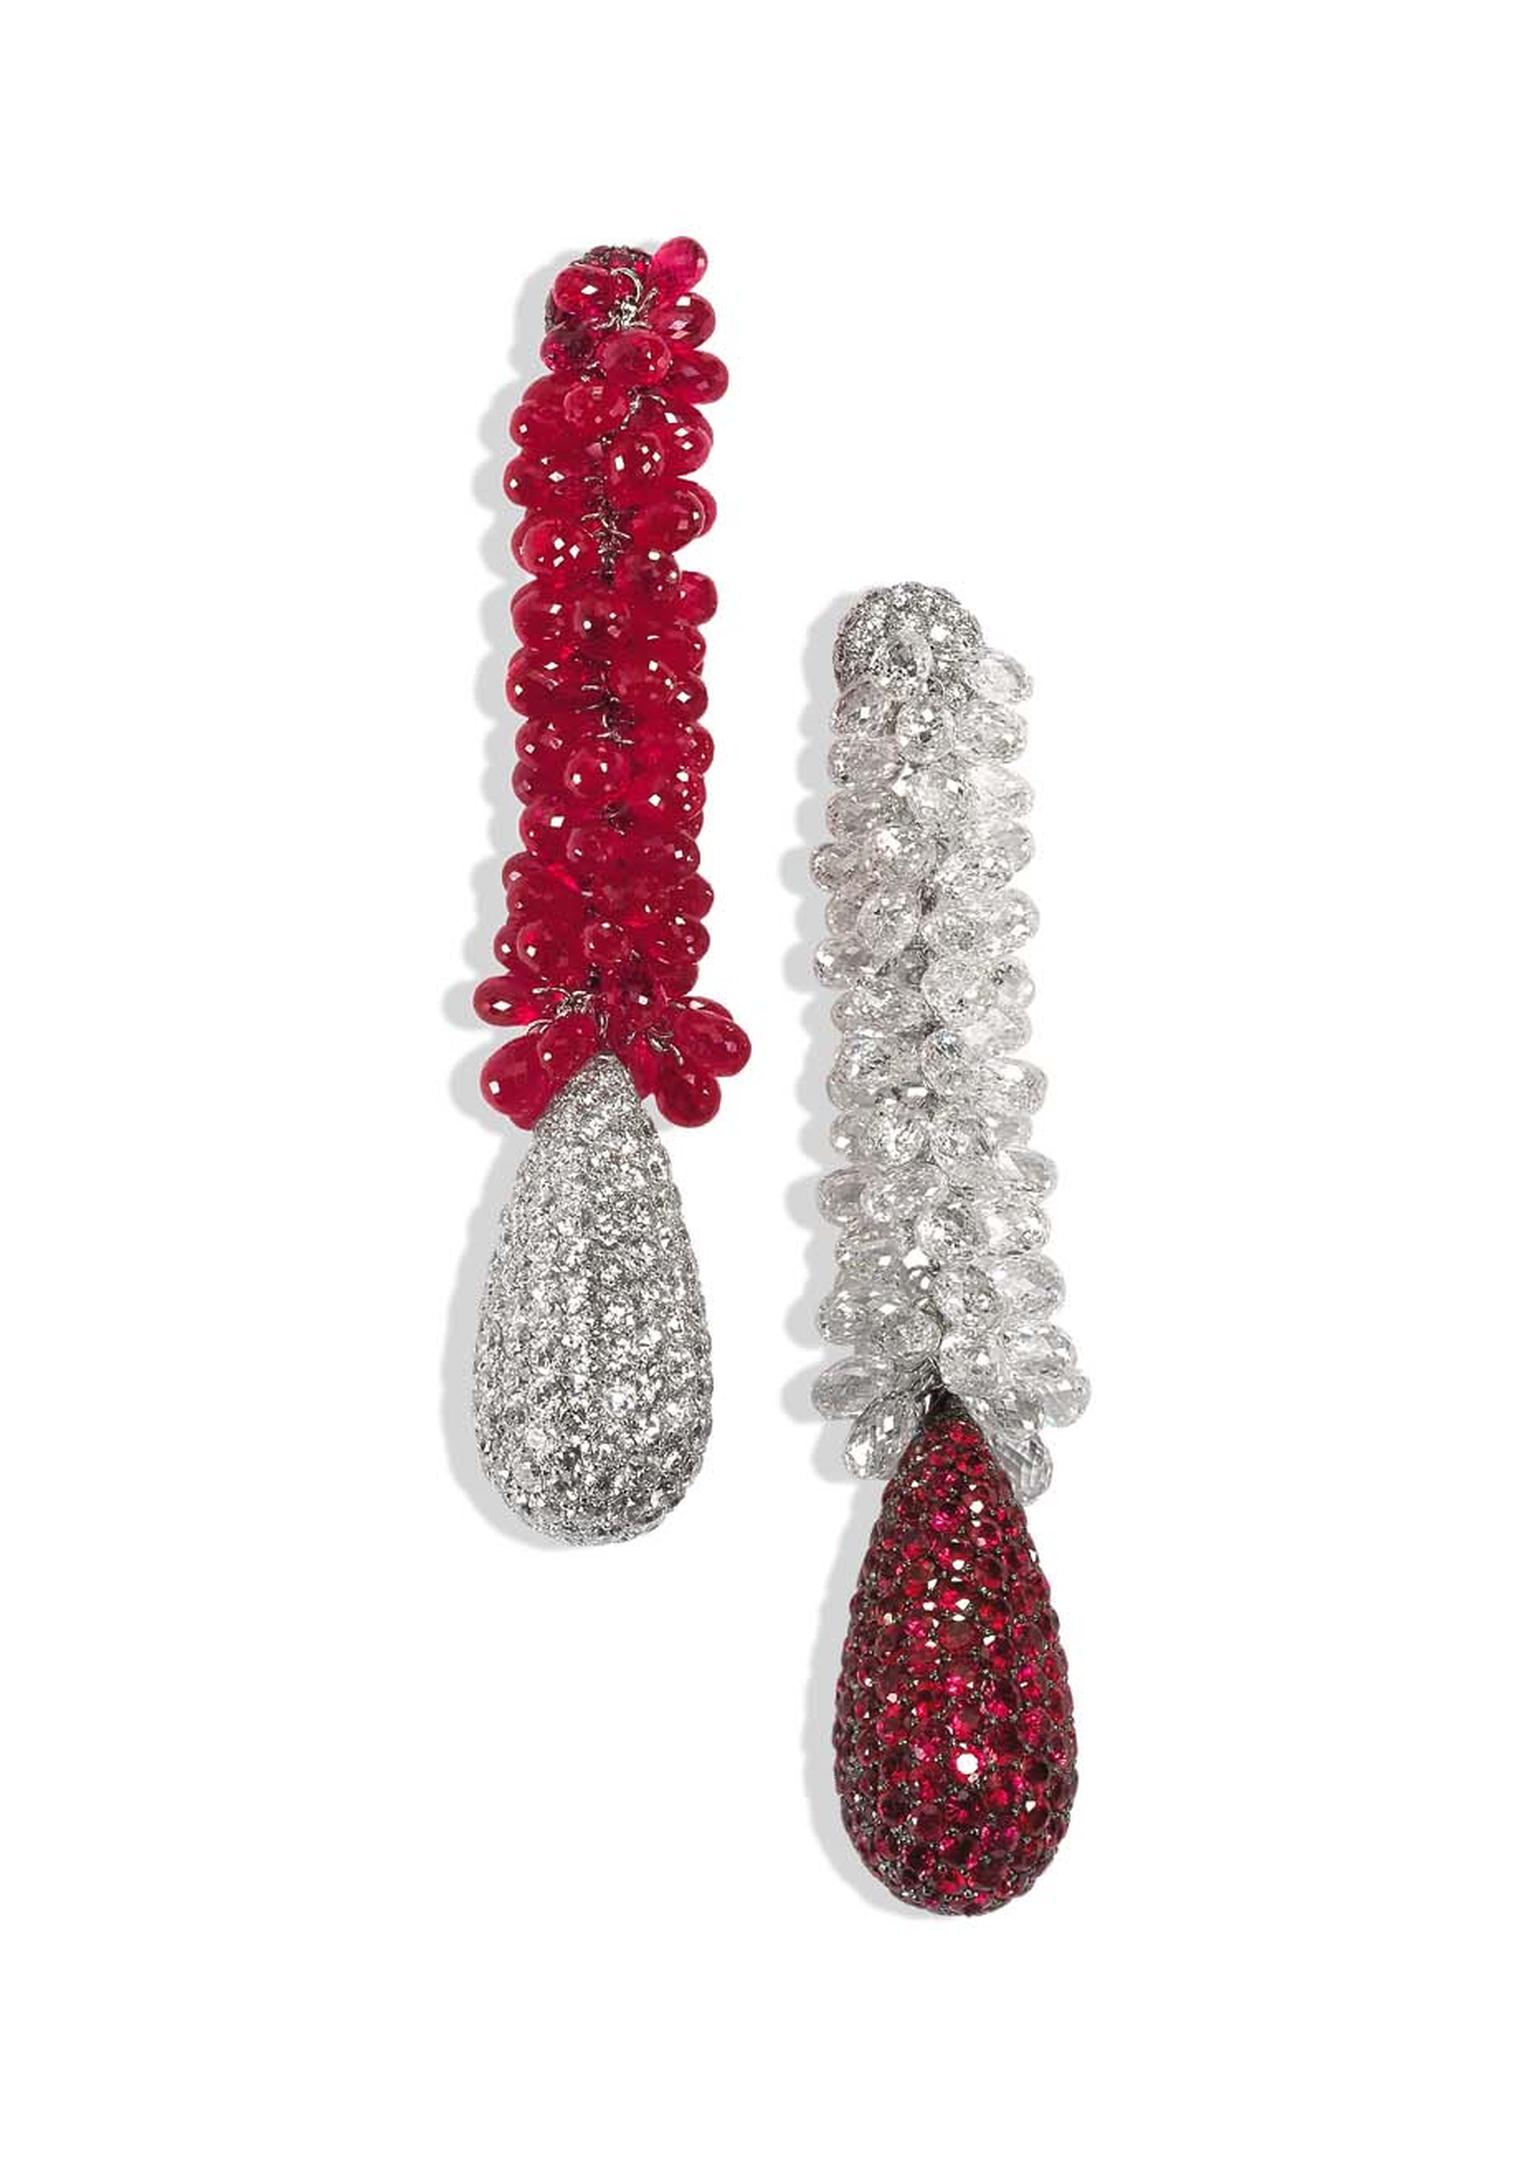 The de GRISOGONO white gold earrings featuring 236 rubies, 236 white diamonds, 81 briolette diamonds and 81 briolette rubies worn by Riley Keough